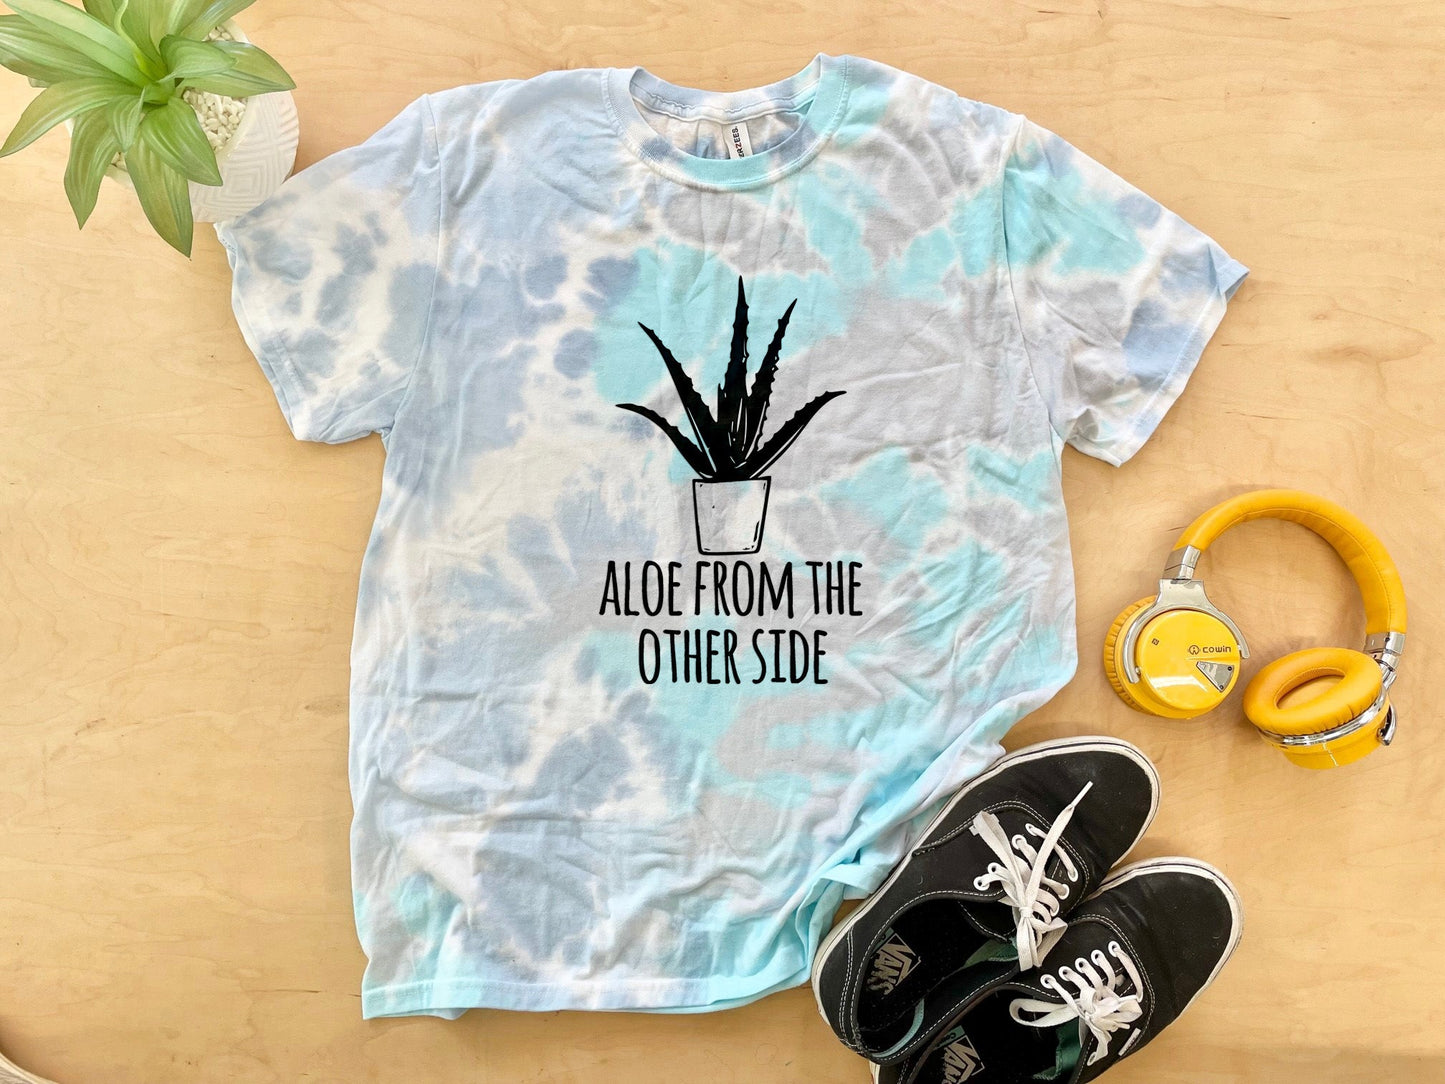 Aloe From The Other Side - Mens/Unisex Tie Dye Tee - Blue